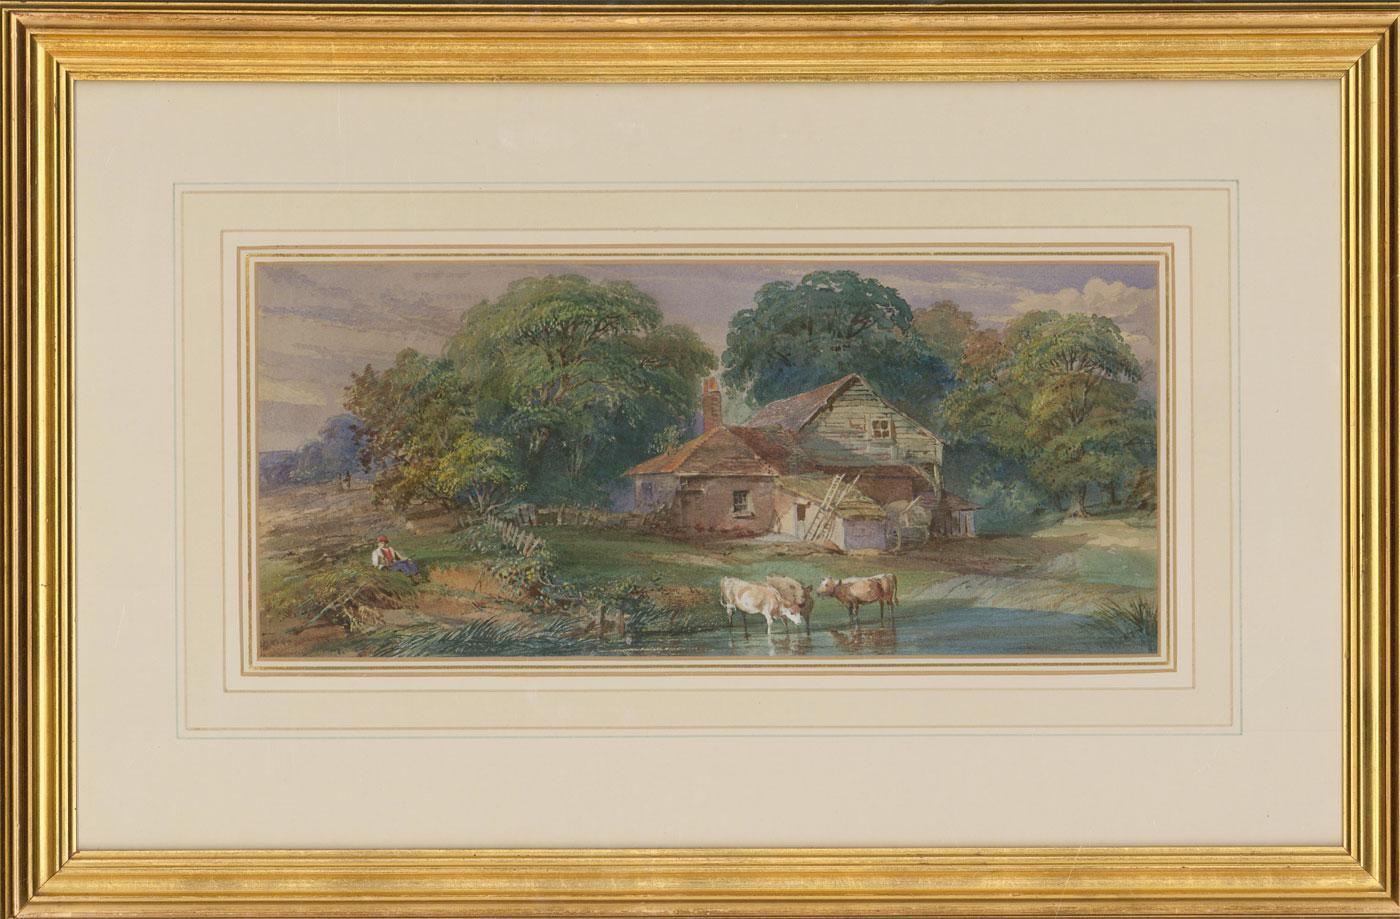 Unknown Landscape Art - George James Knox (1810-1897) - Framed Mid 19th Century Watercolour, The Cottage